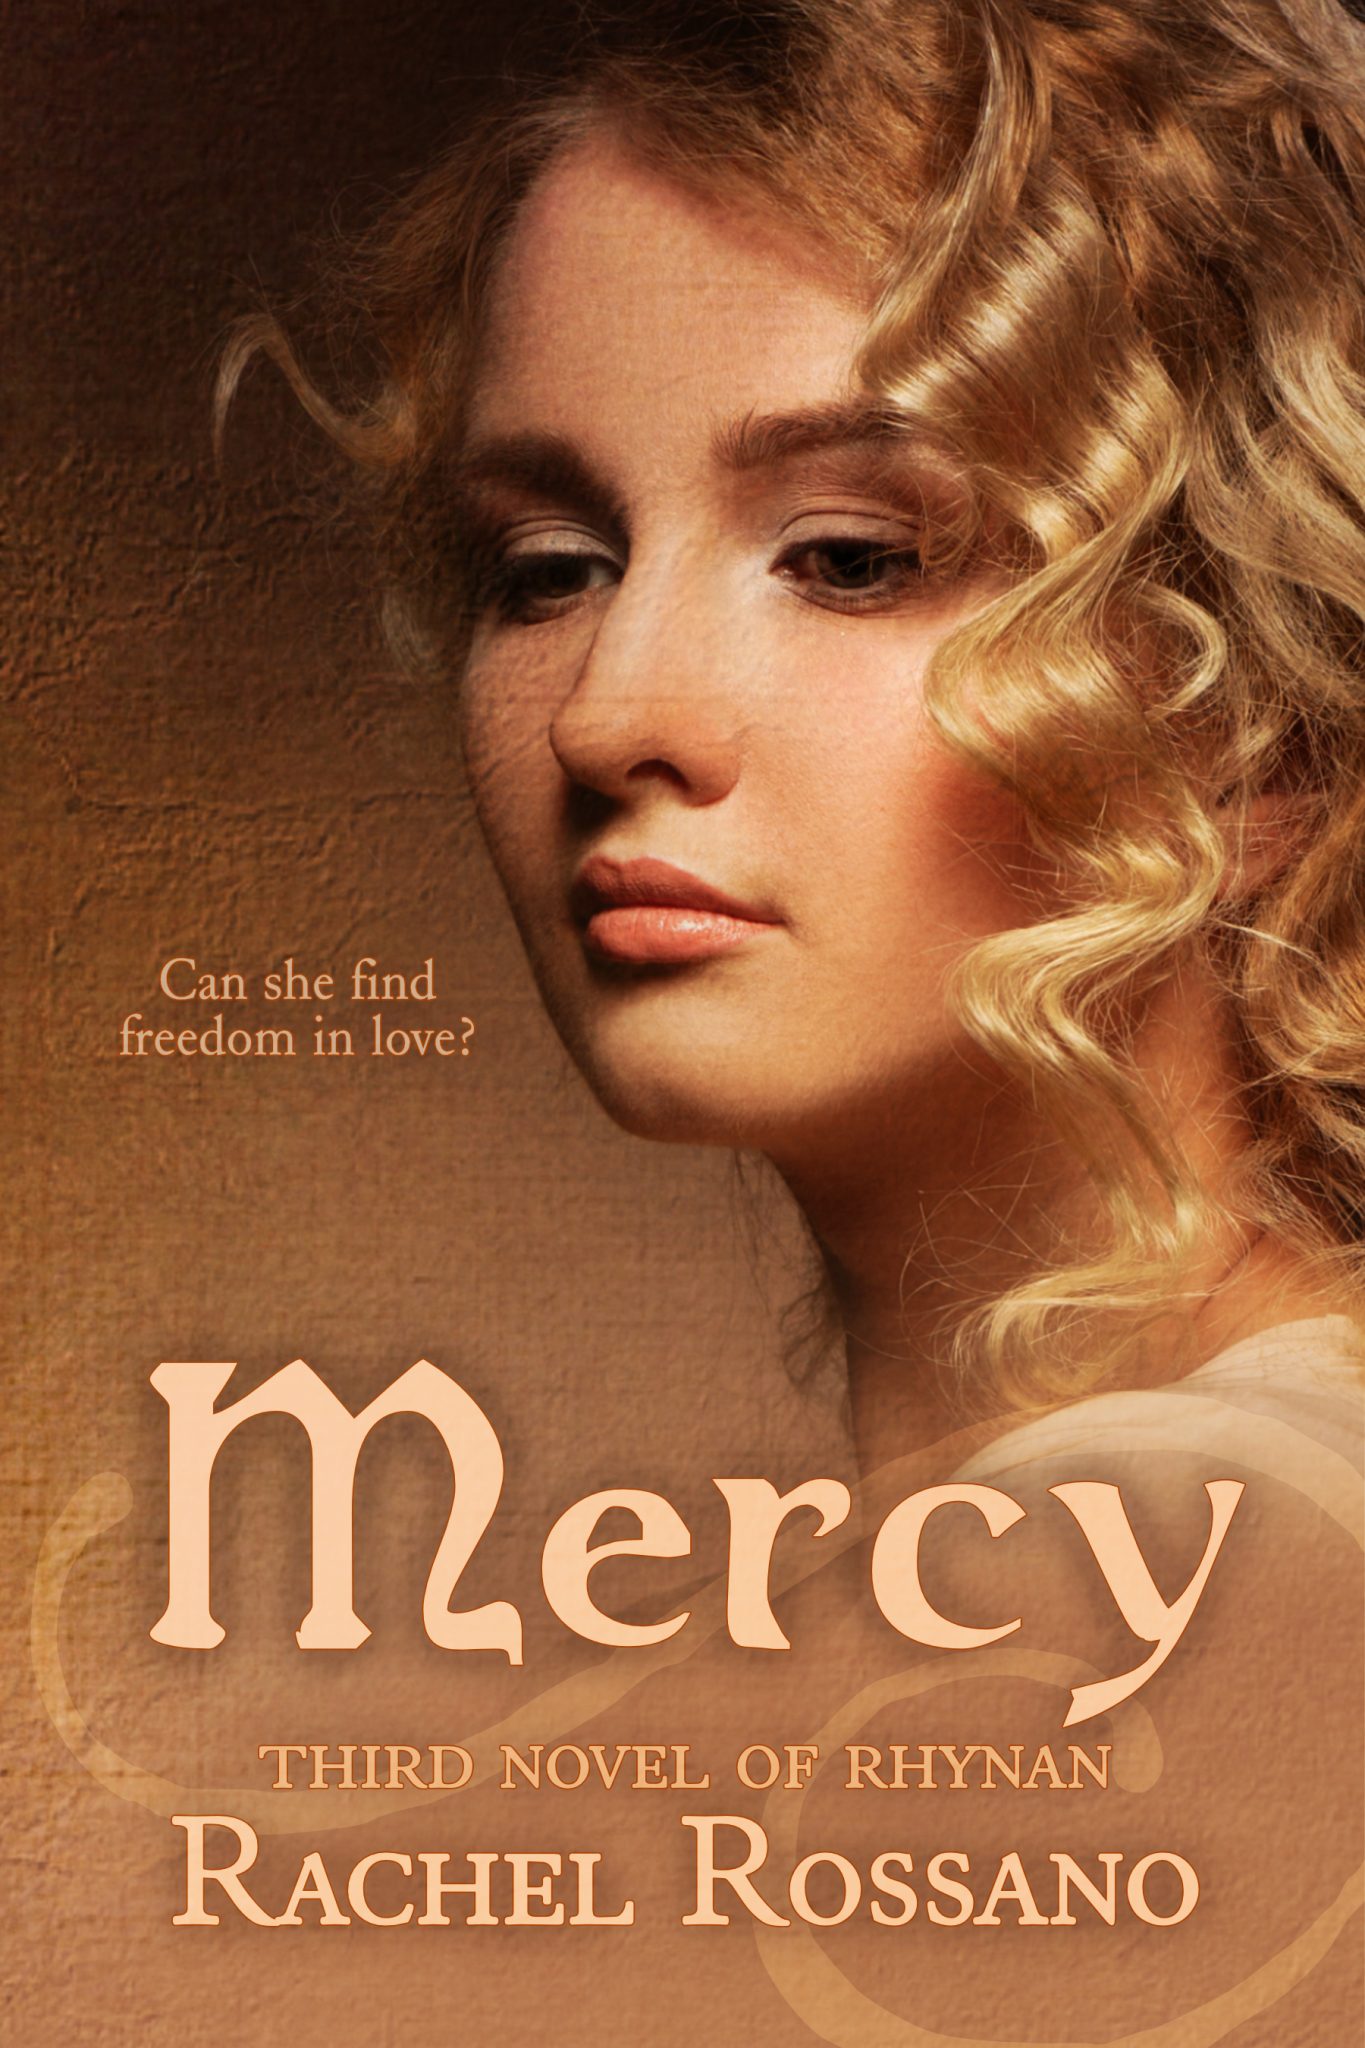 Mercy, A Story of Second Chances